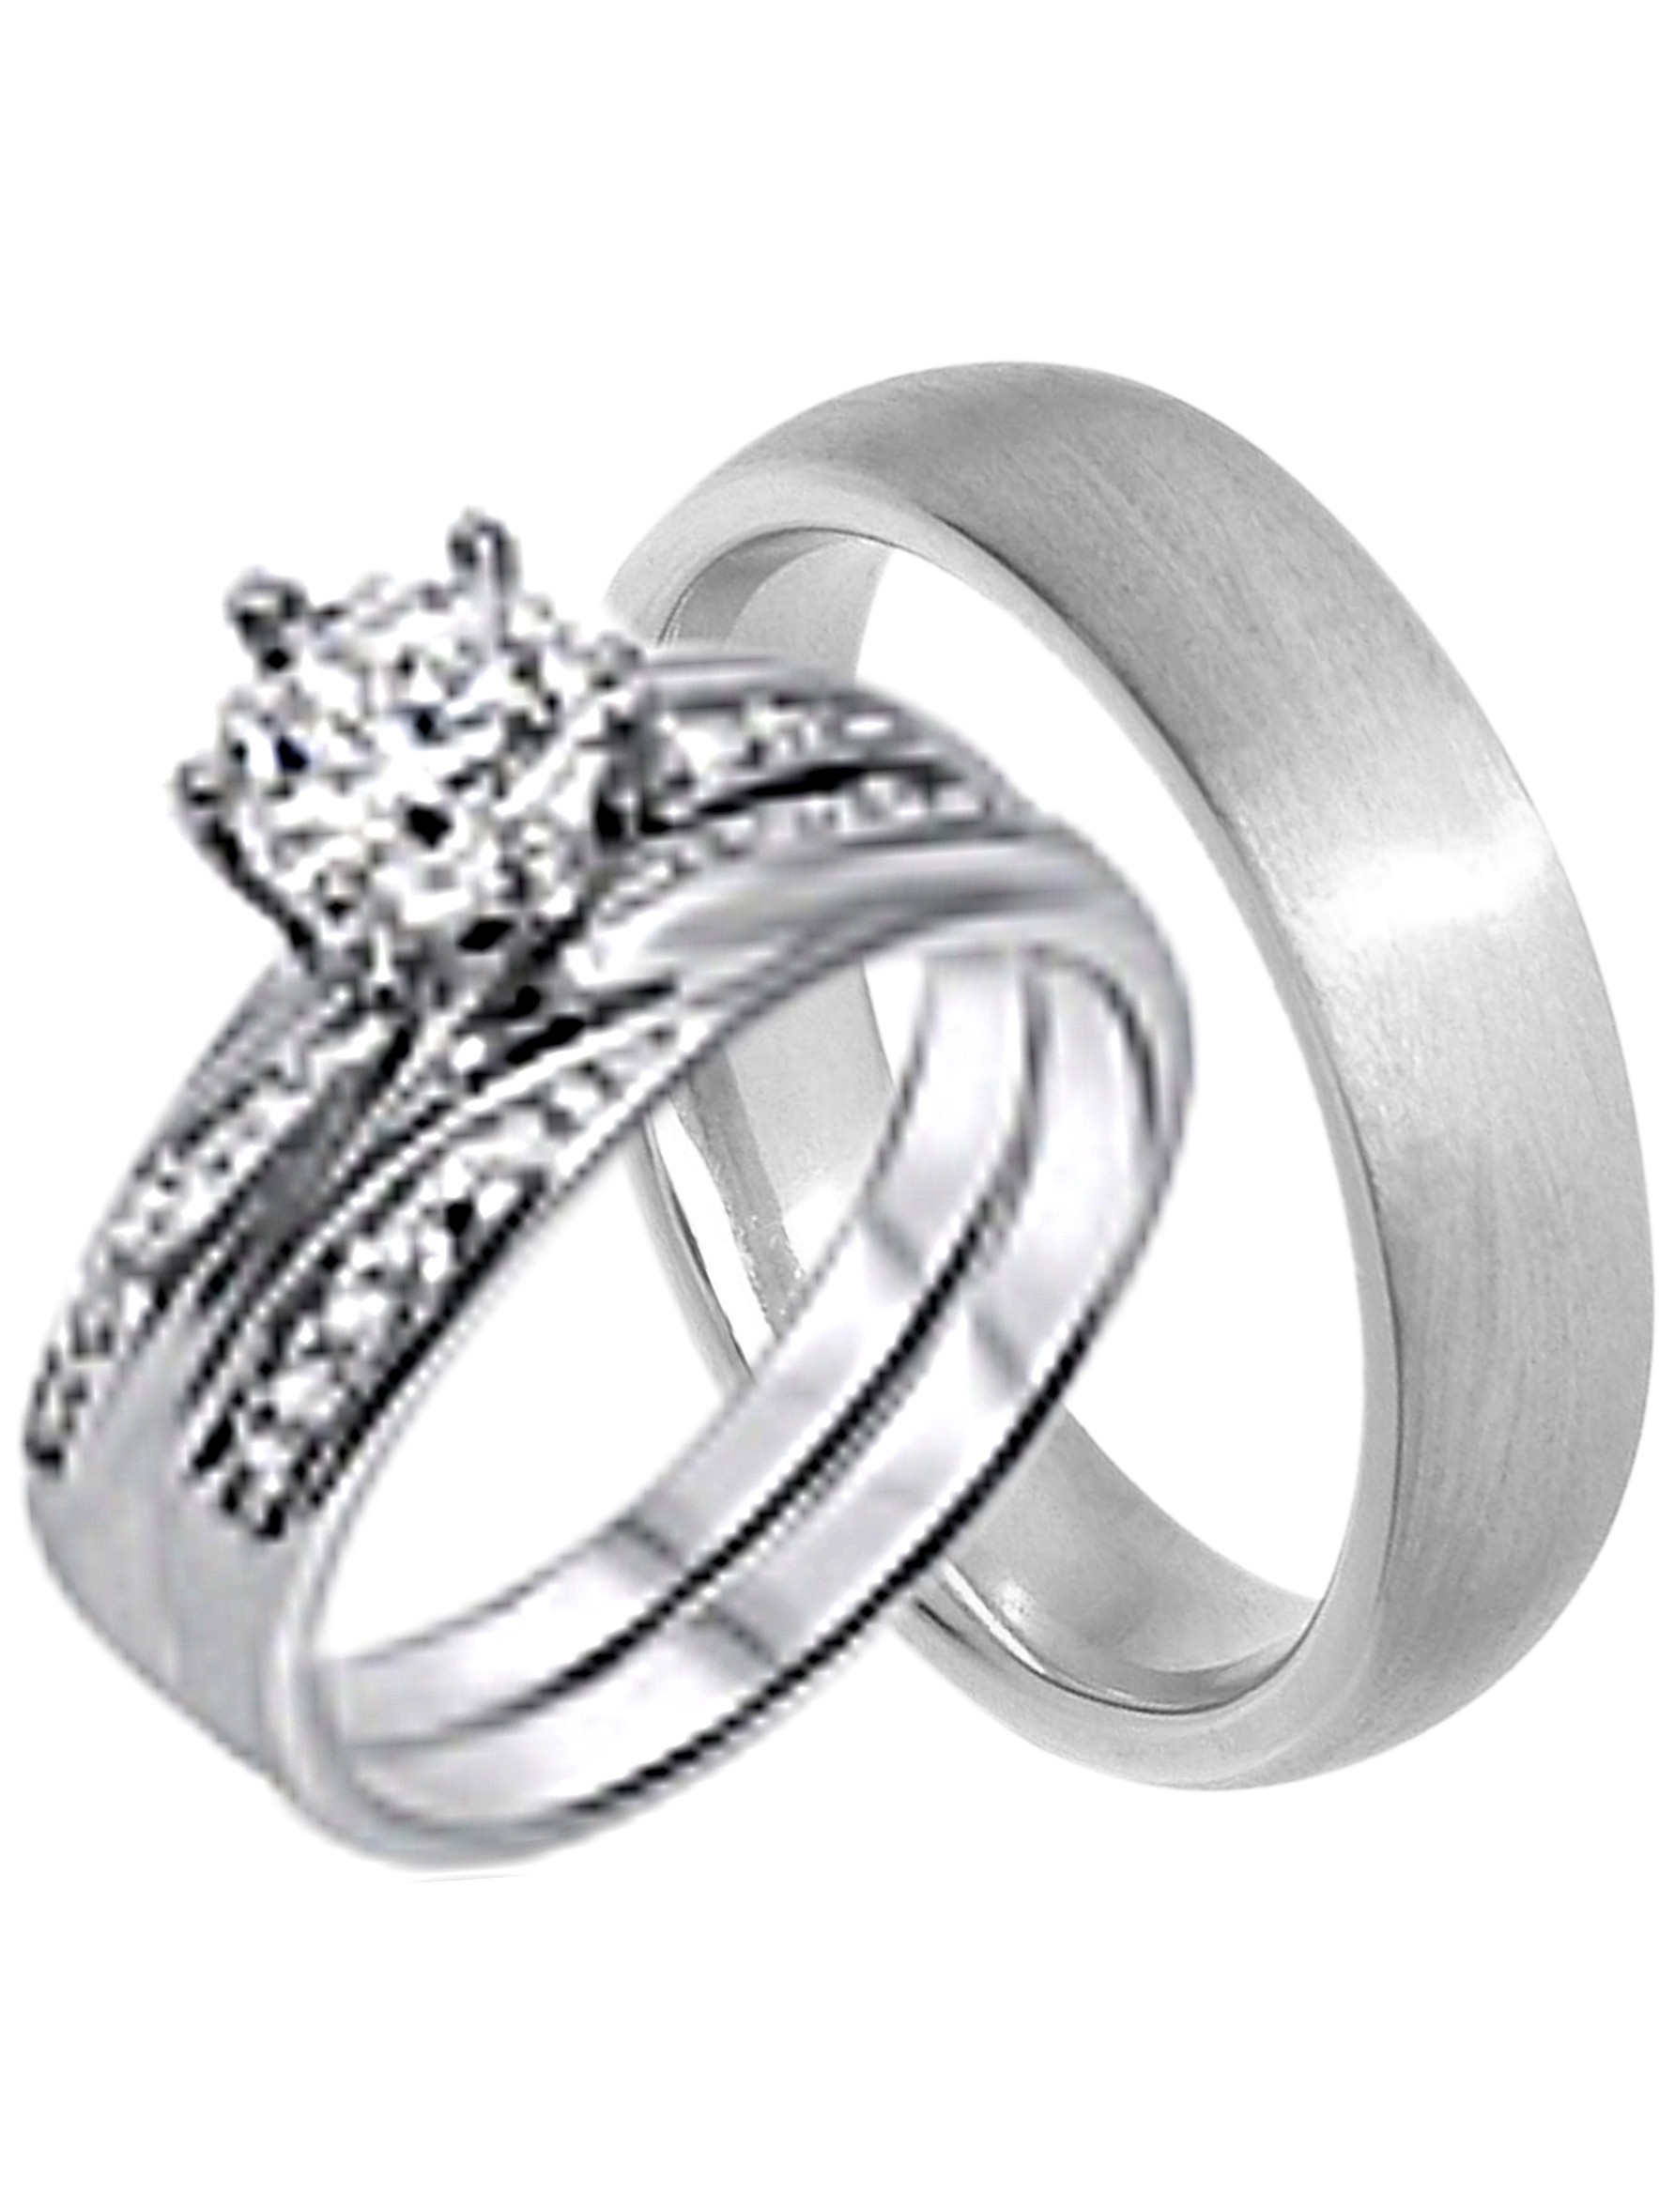 Walmart Wedding Ring Sets
 His and Hers Wedding Ring Set Cheap Wedding Bands for Him